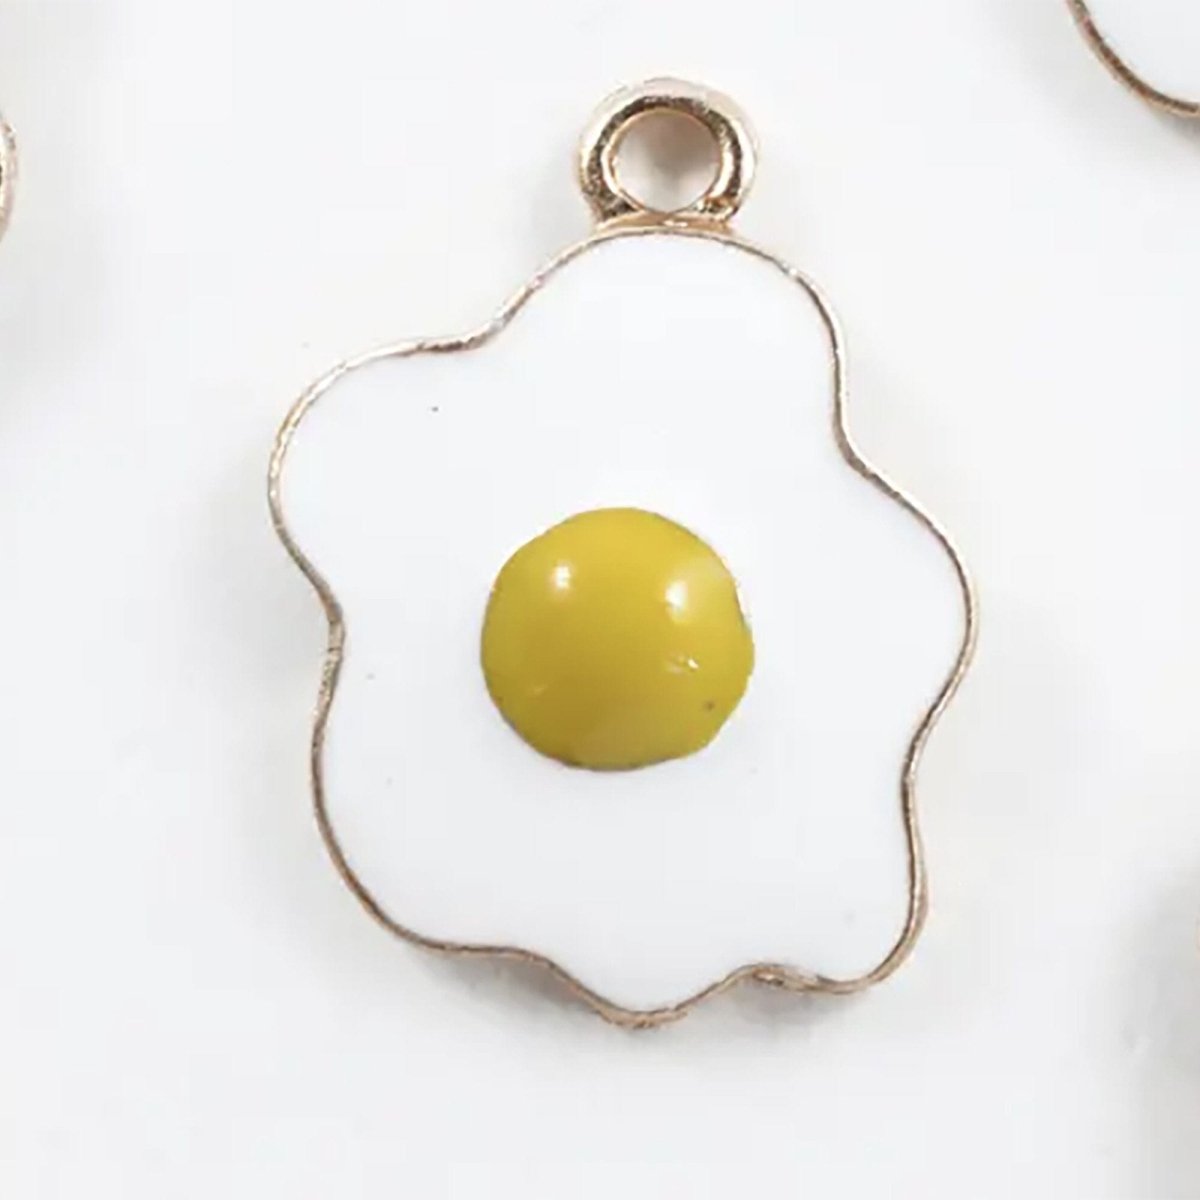 Fried Egg Collar Charm - Oh My Paw'd